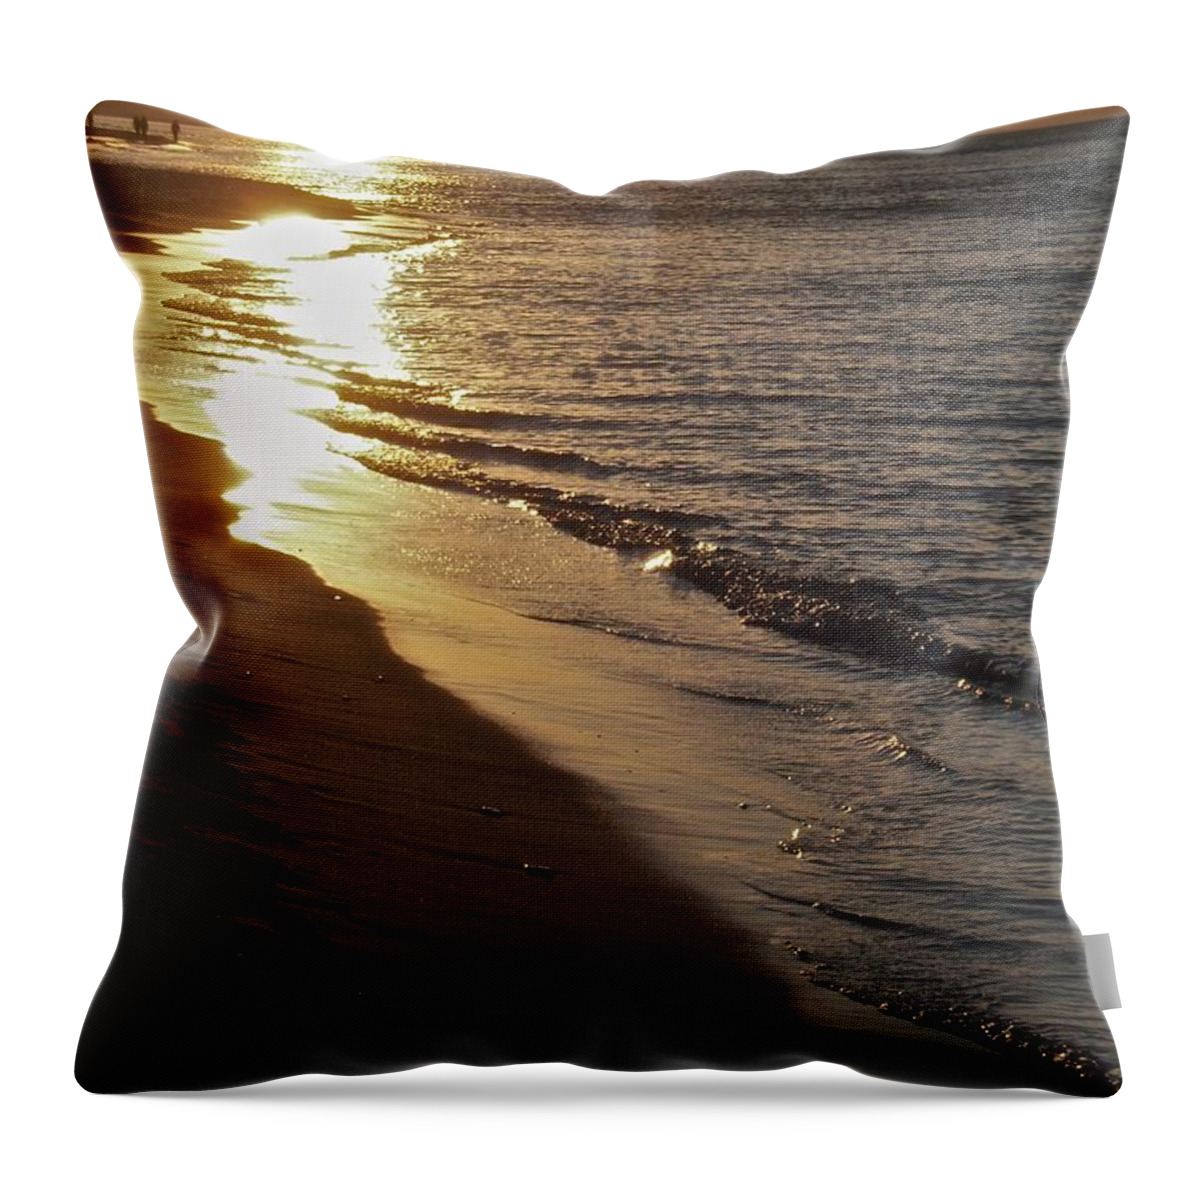 Steel Mill Throw Pillow featuring the photograph Steel Mill Sunset by Pamela Clements